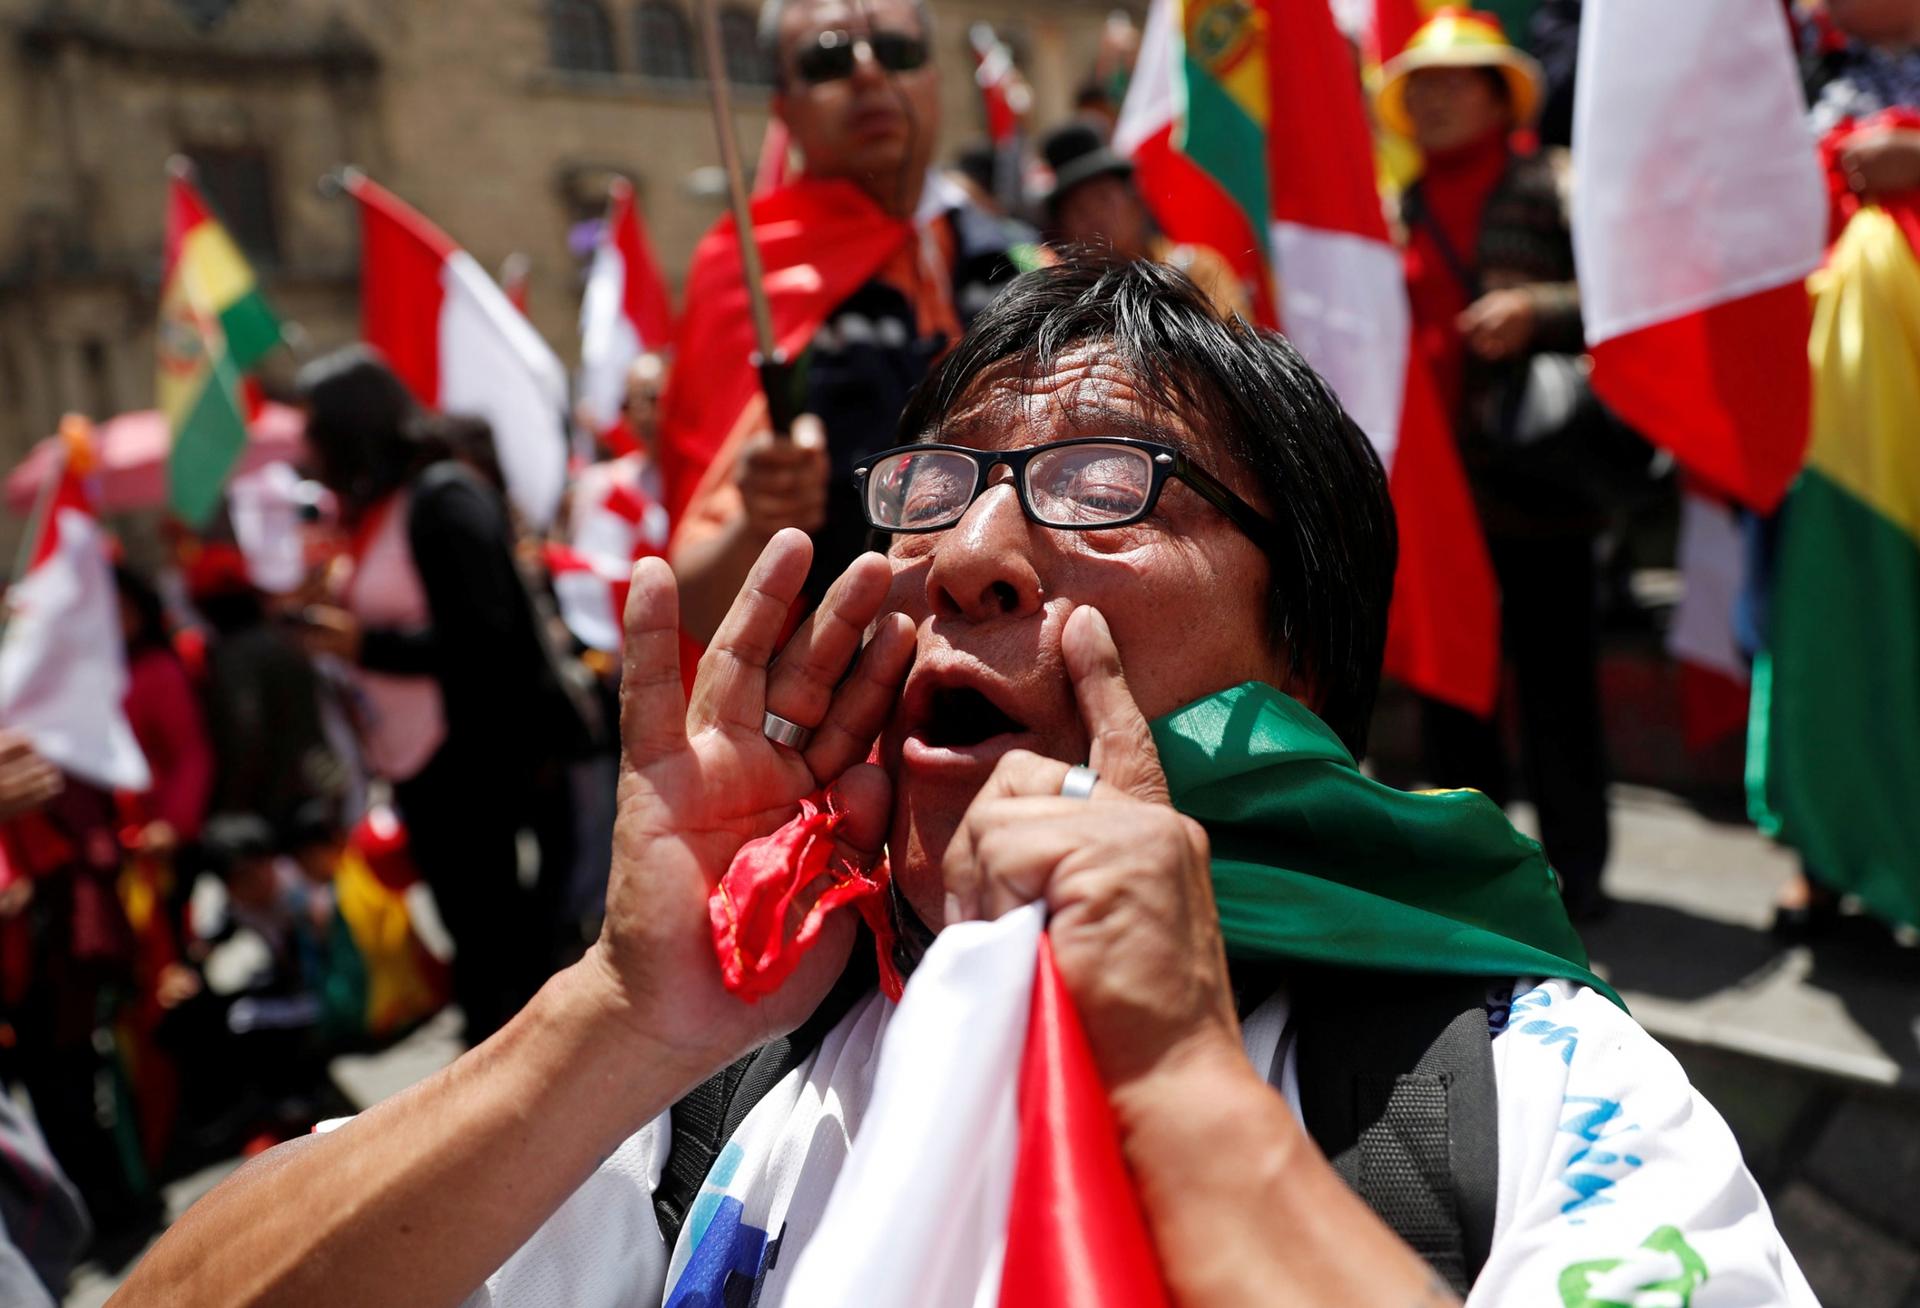 A demonstrator is shown with their hands around their mouth shouting and holding a Bolivian flag.